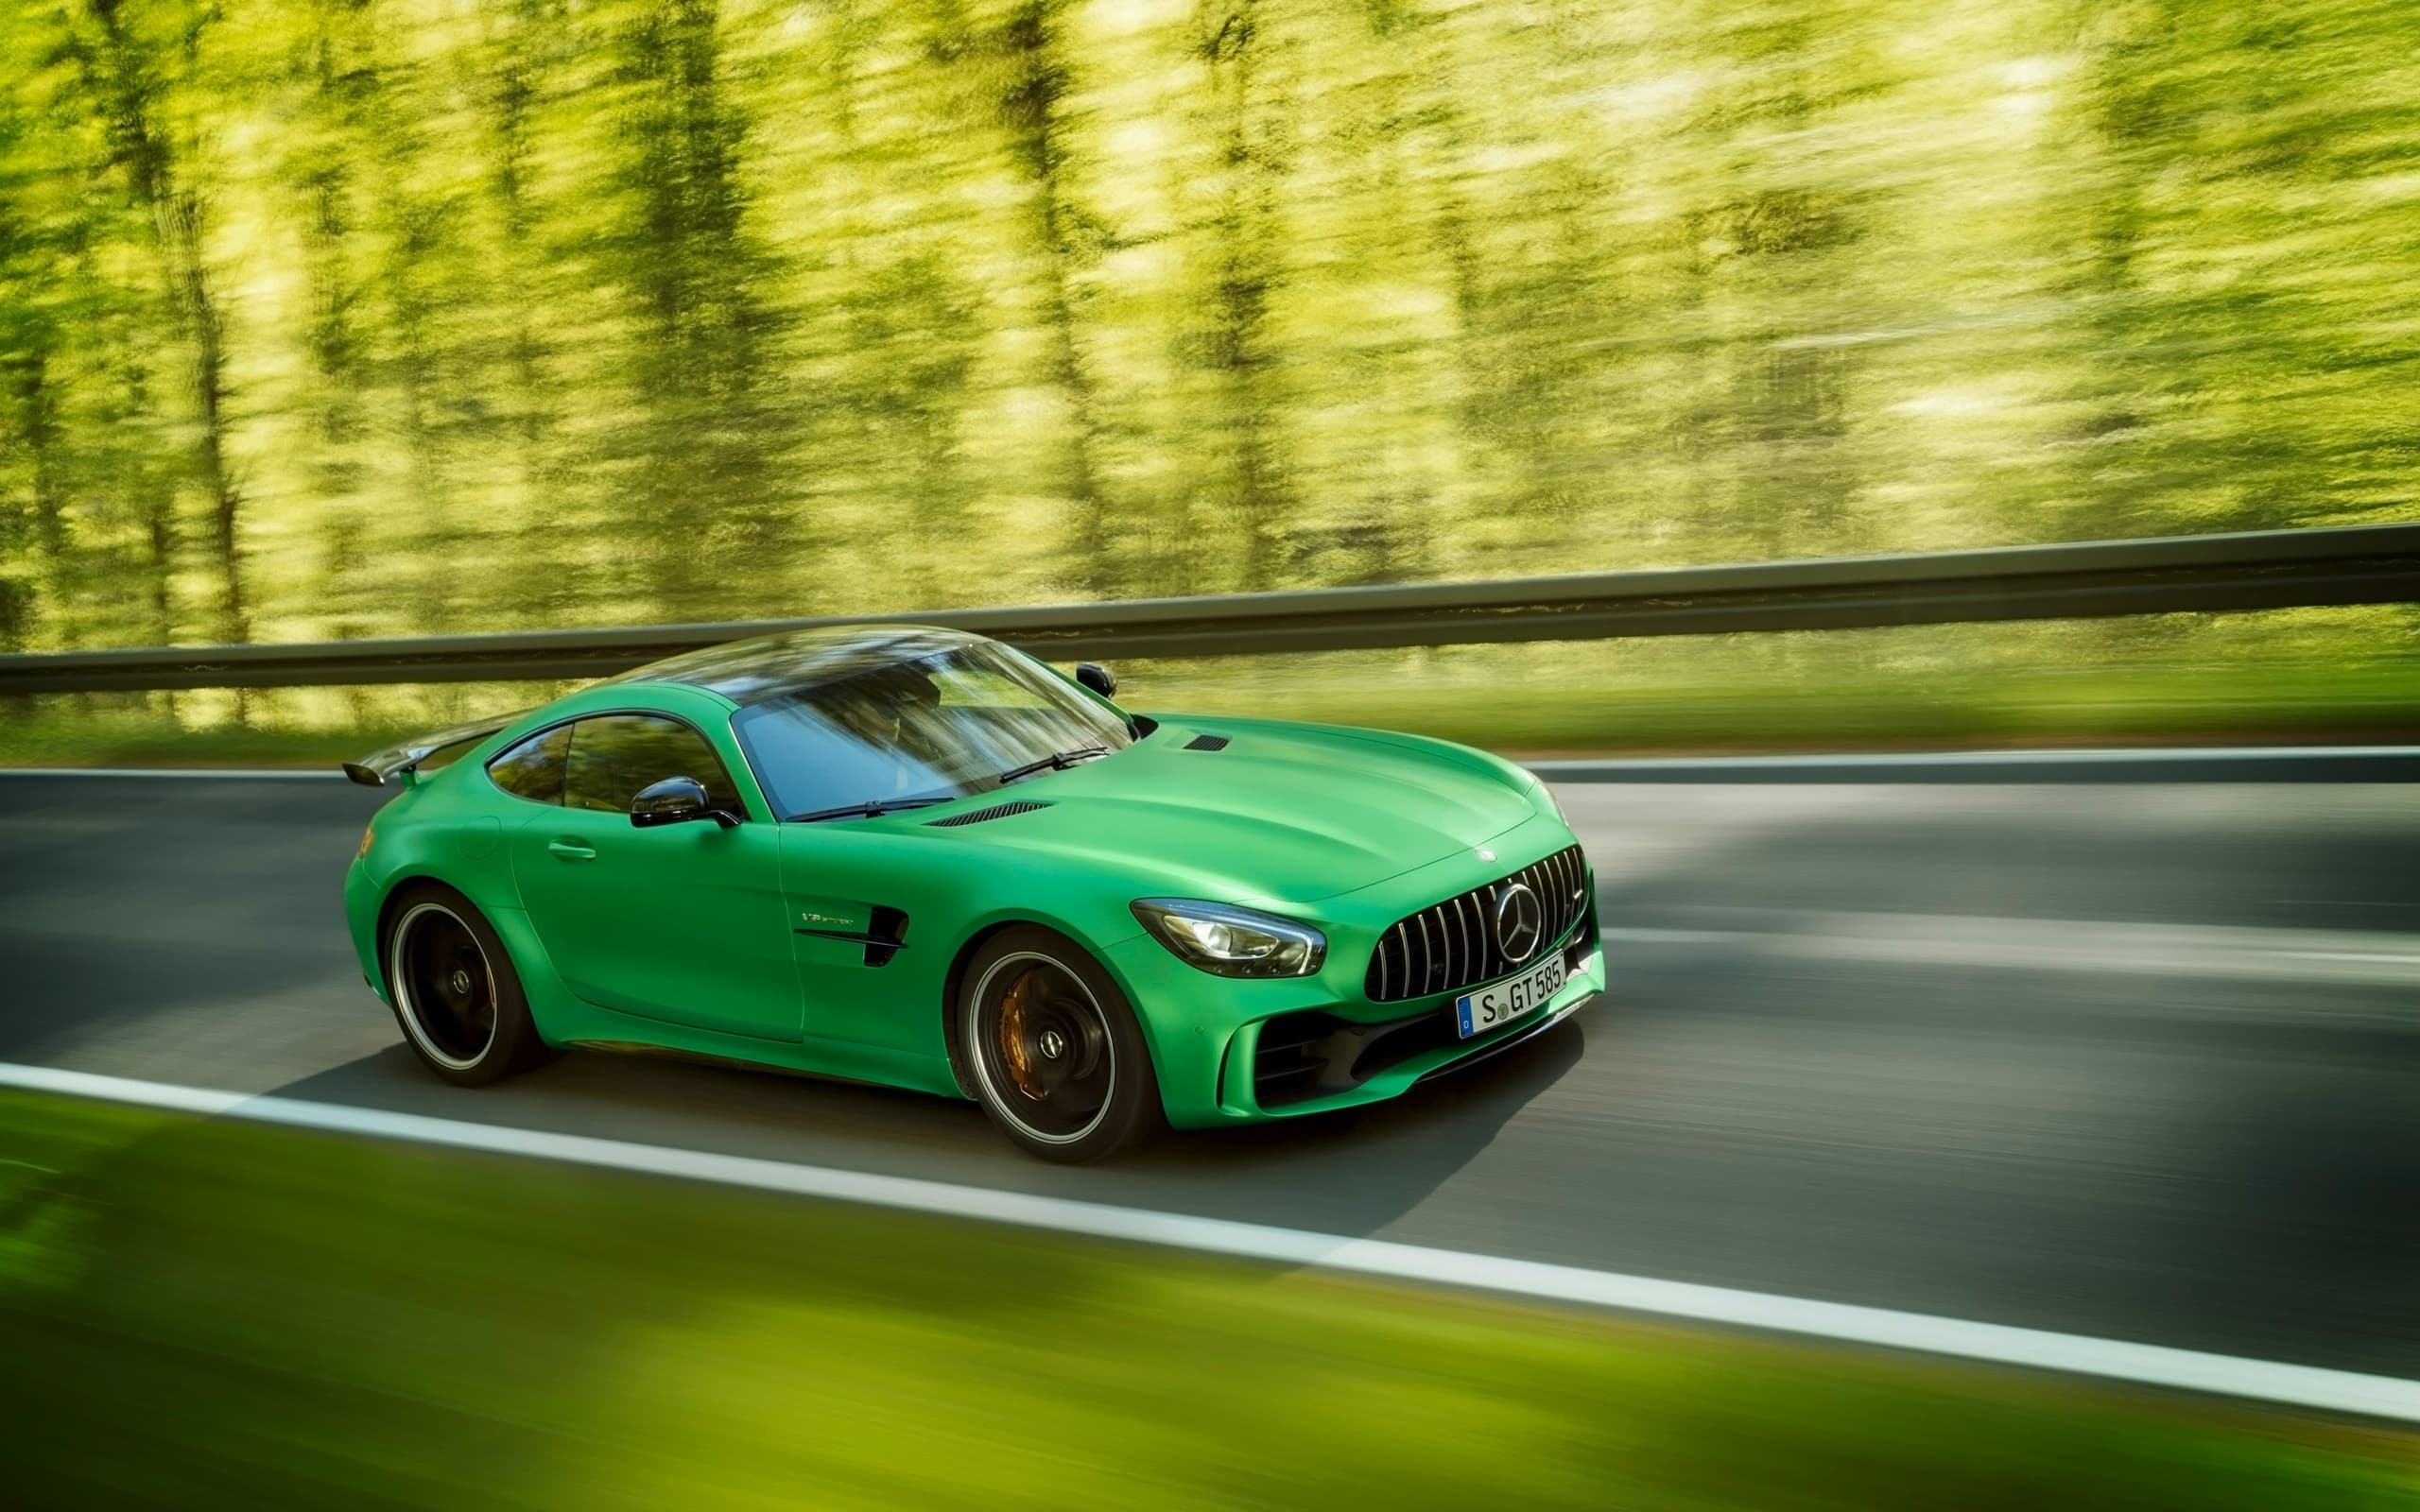 Free Download Mercedes Amg Gt R 2017 Wallpapers Hd High Quality Images, Photos, Reviews